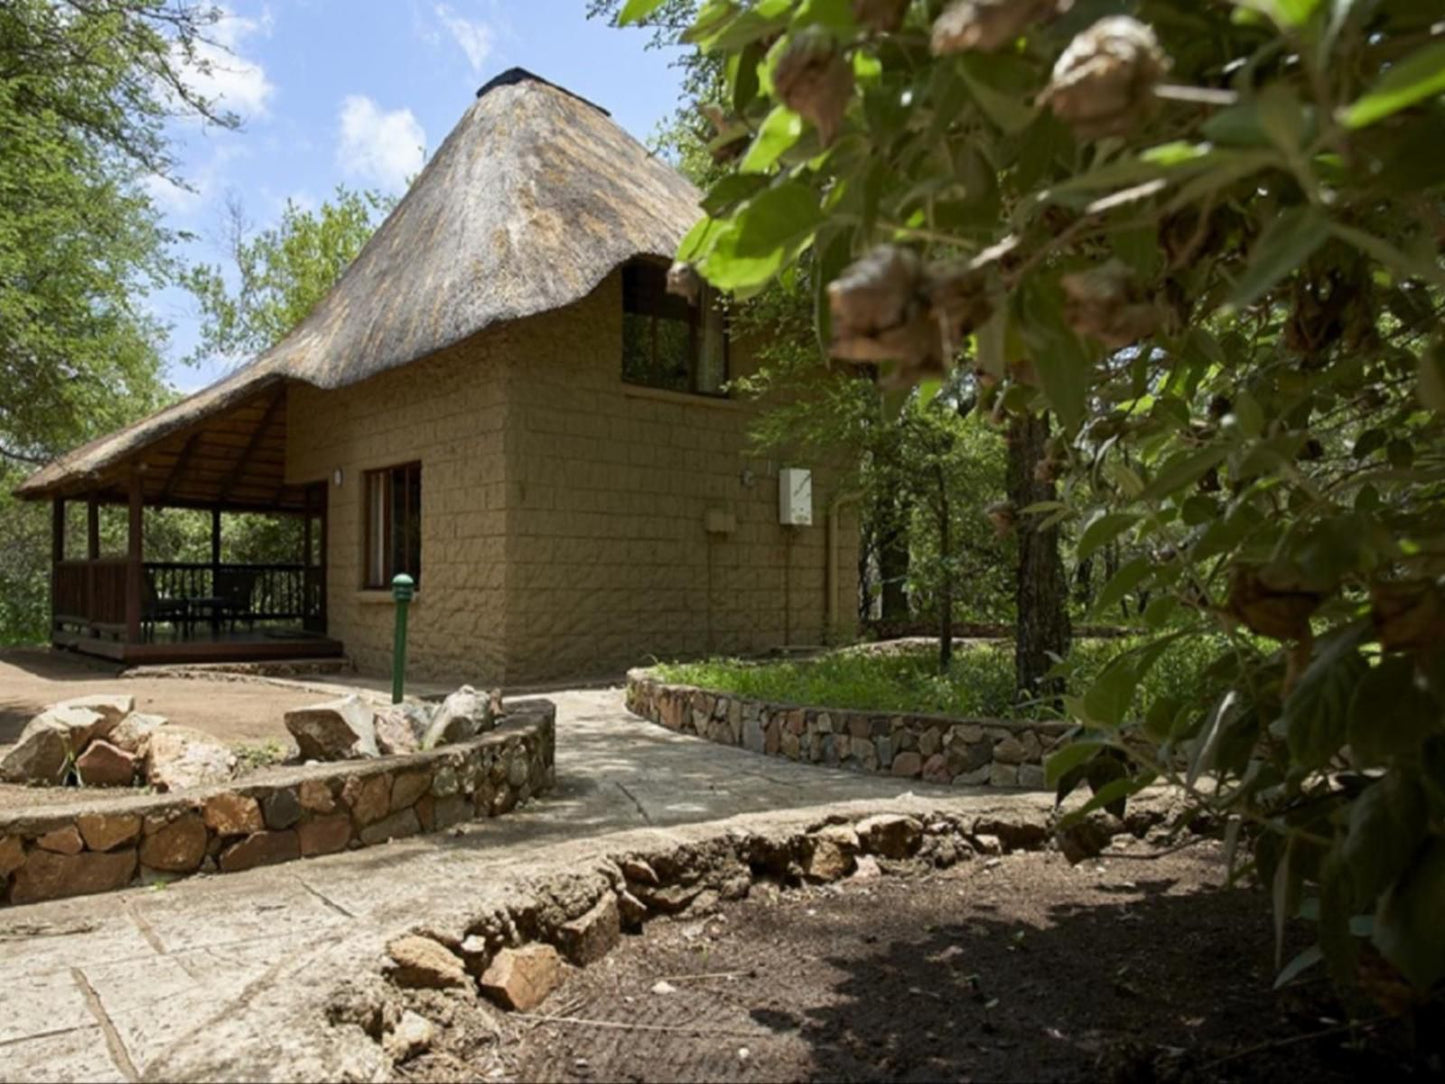 Grand Kruger Lodge Marloth Park Mpumalanga South Africa Cabin, Building, Architecture